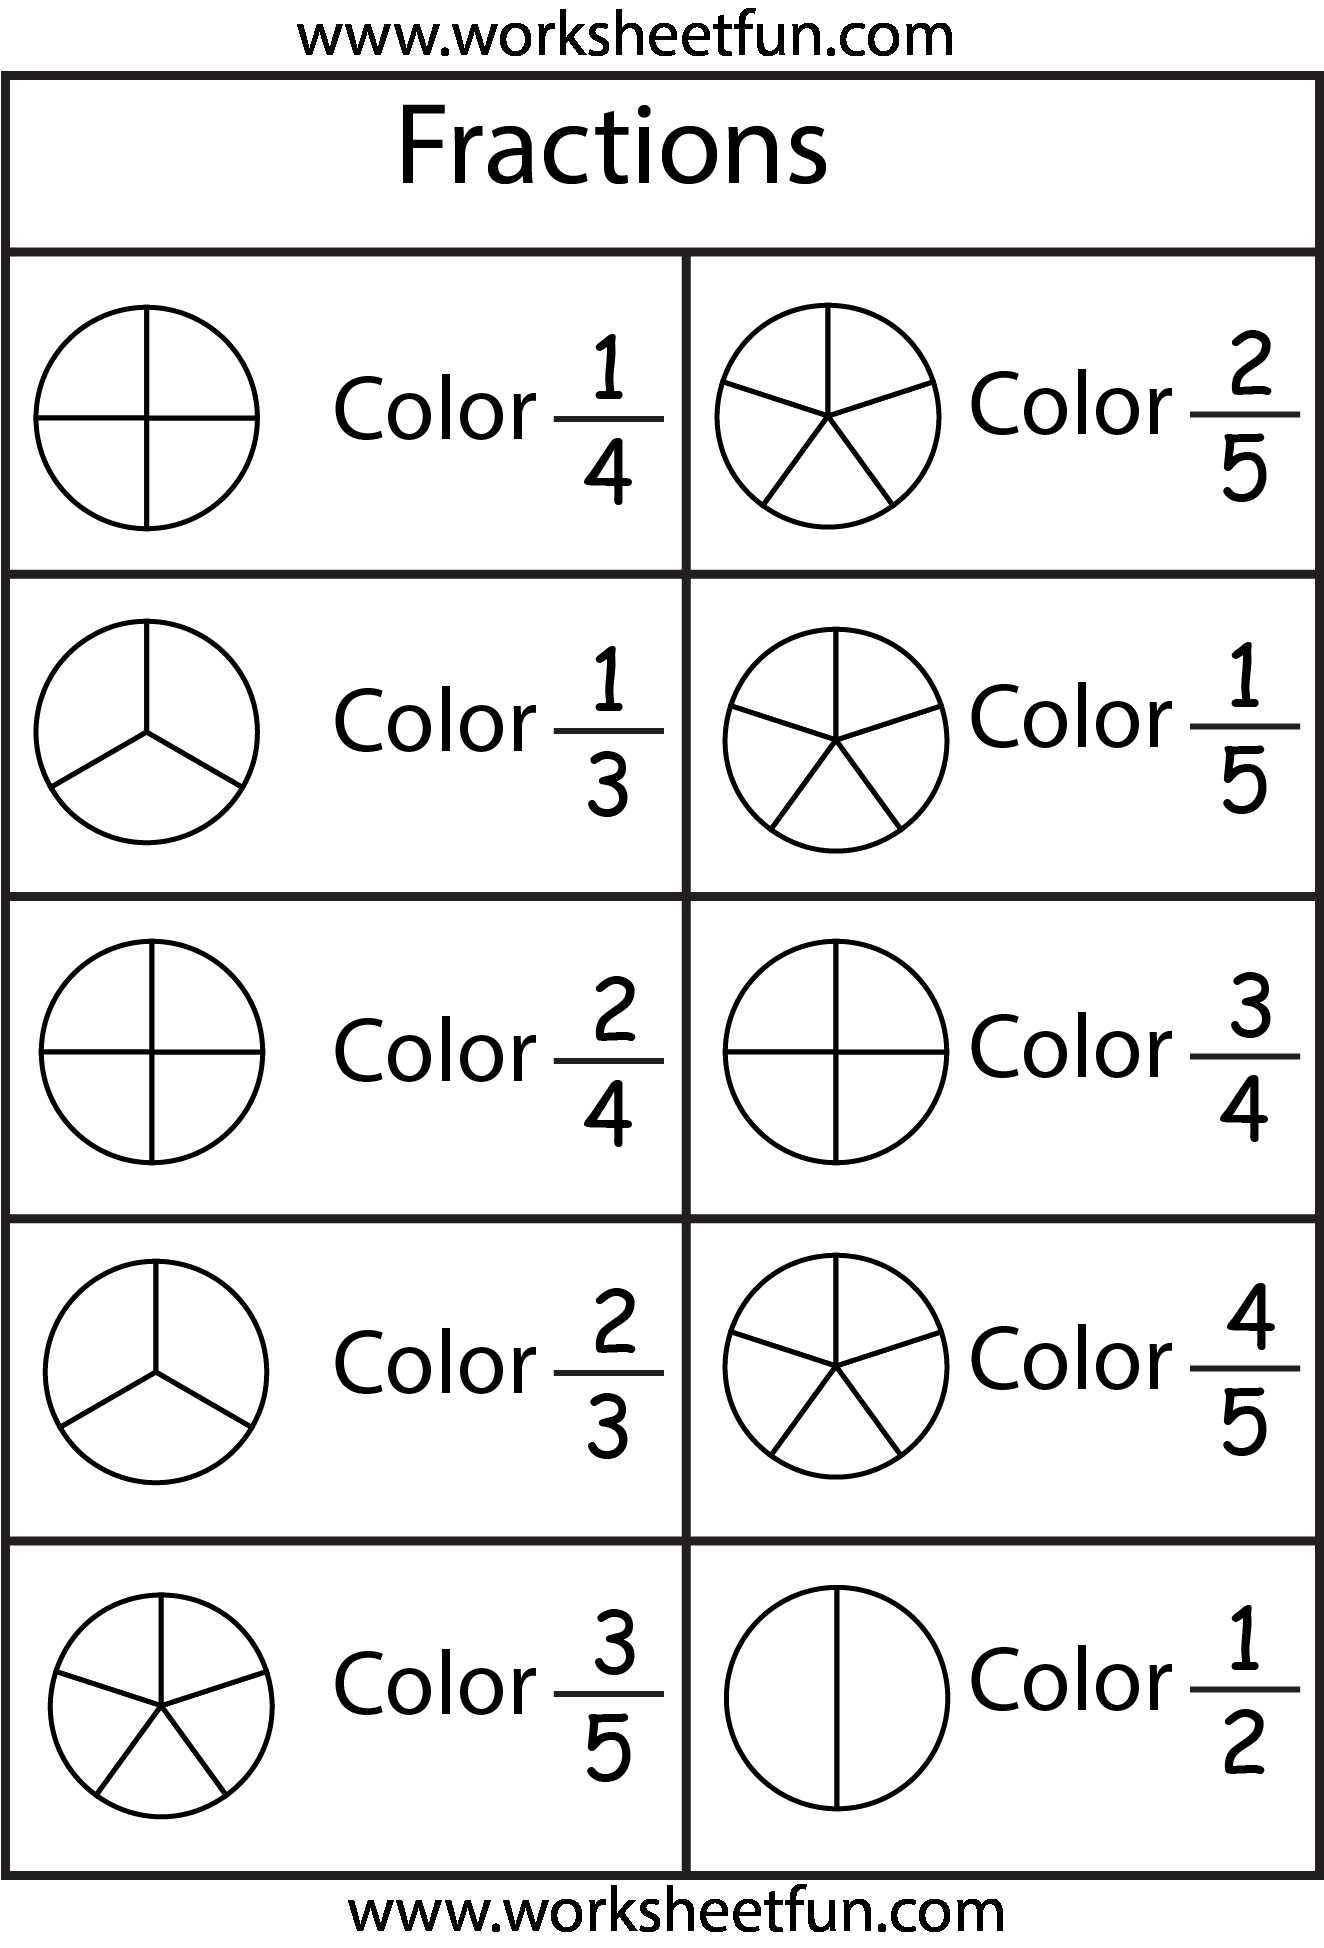 7th Grade Common Core Math Worksheets with Answer Key as Well as Color the Fraction 4 Worksheets Printable Worksheets